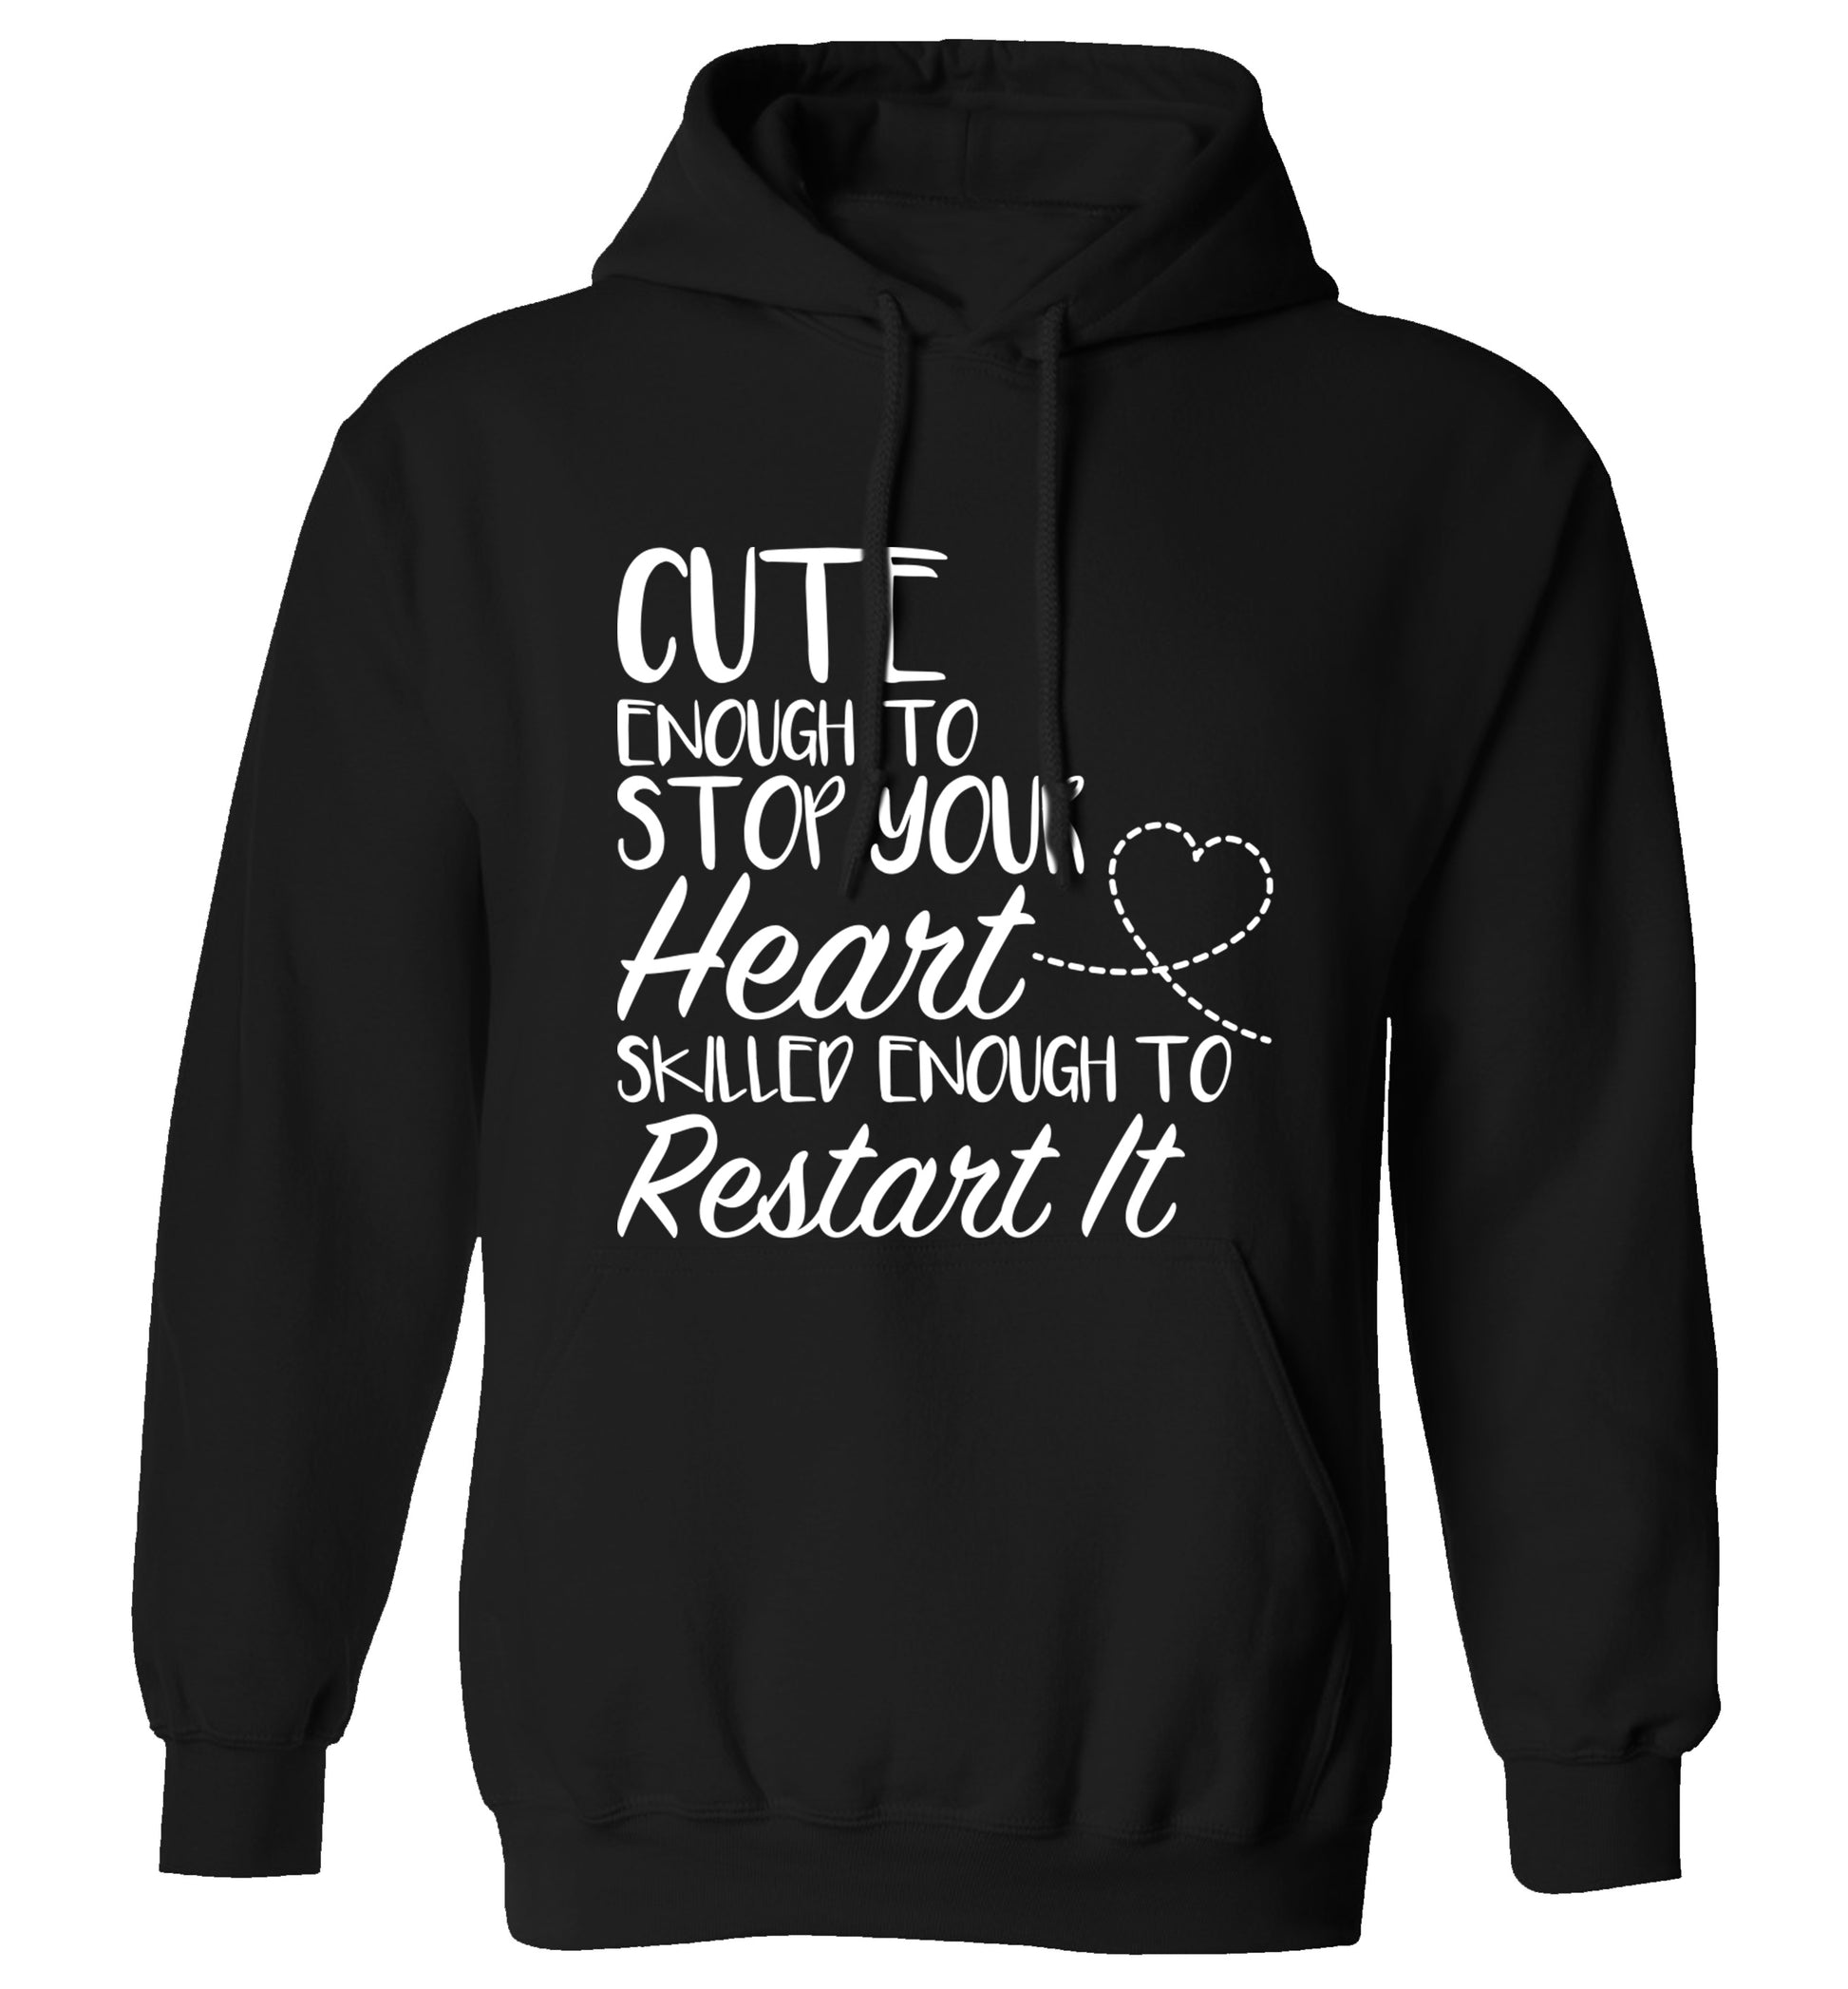 Cute enough to stop your heart skilled enough to restart it adults unisex black hoodie 2XL